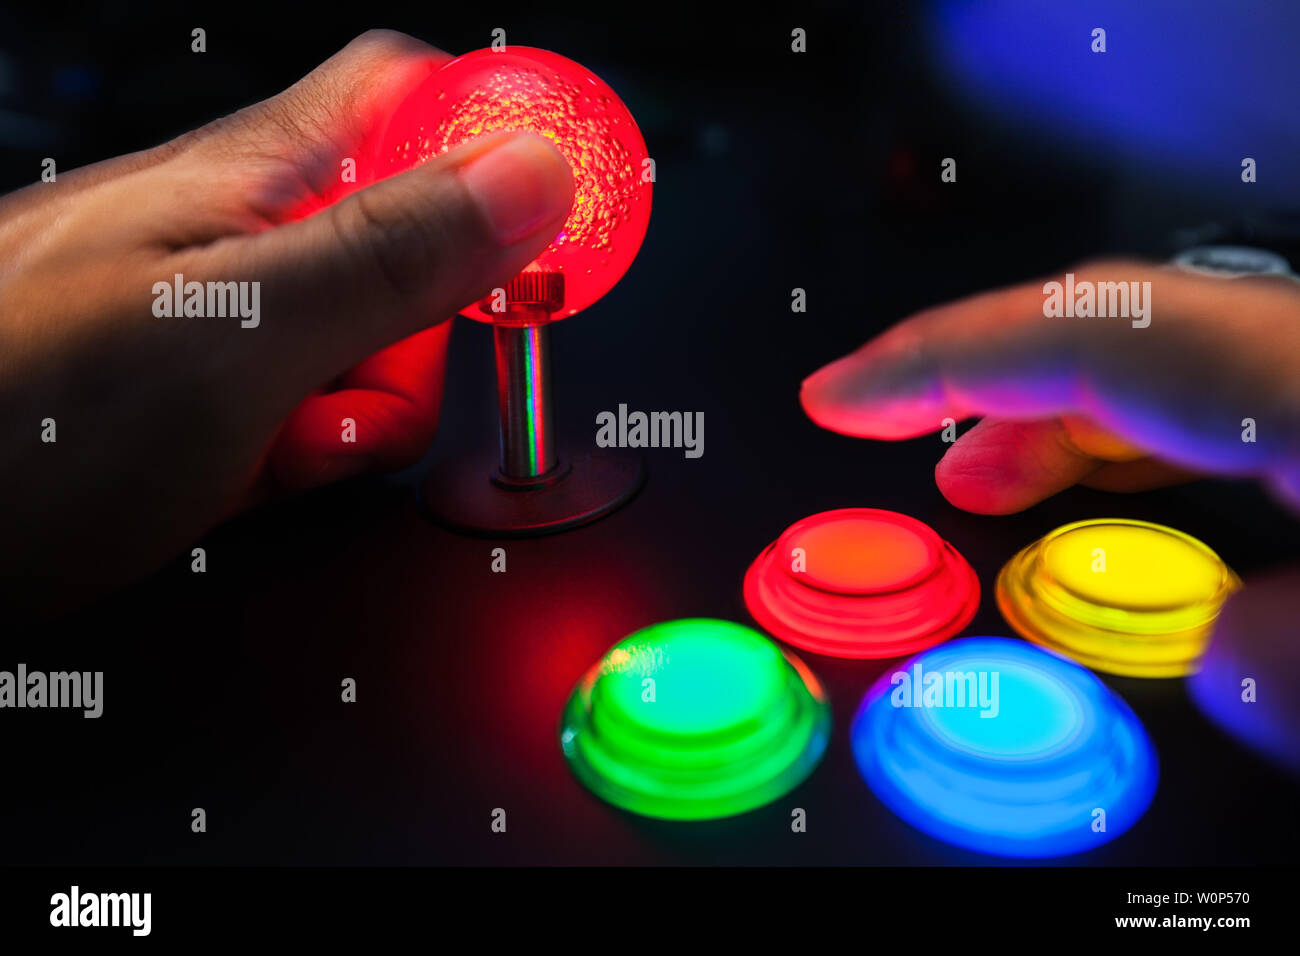 A red lighted arcade joystick and four button layout push buttons being played by a video gamer on a retro arcade machine. Stock Photo